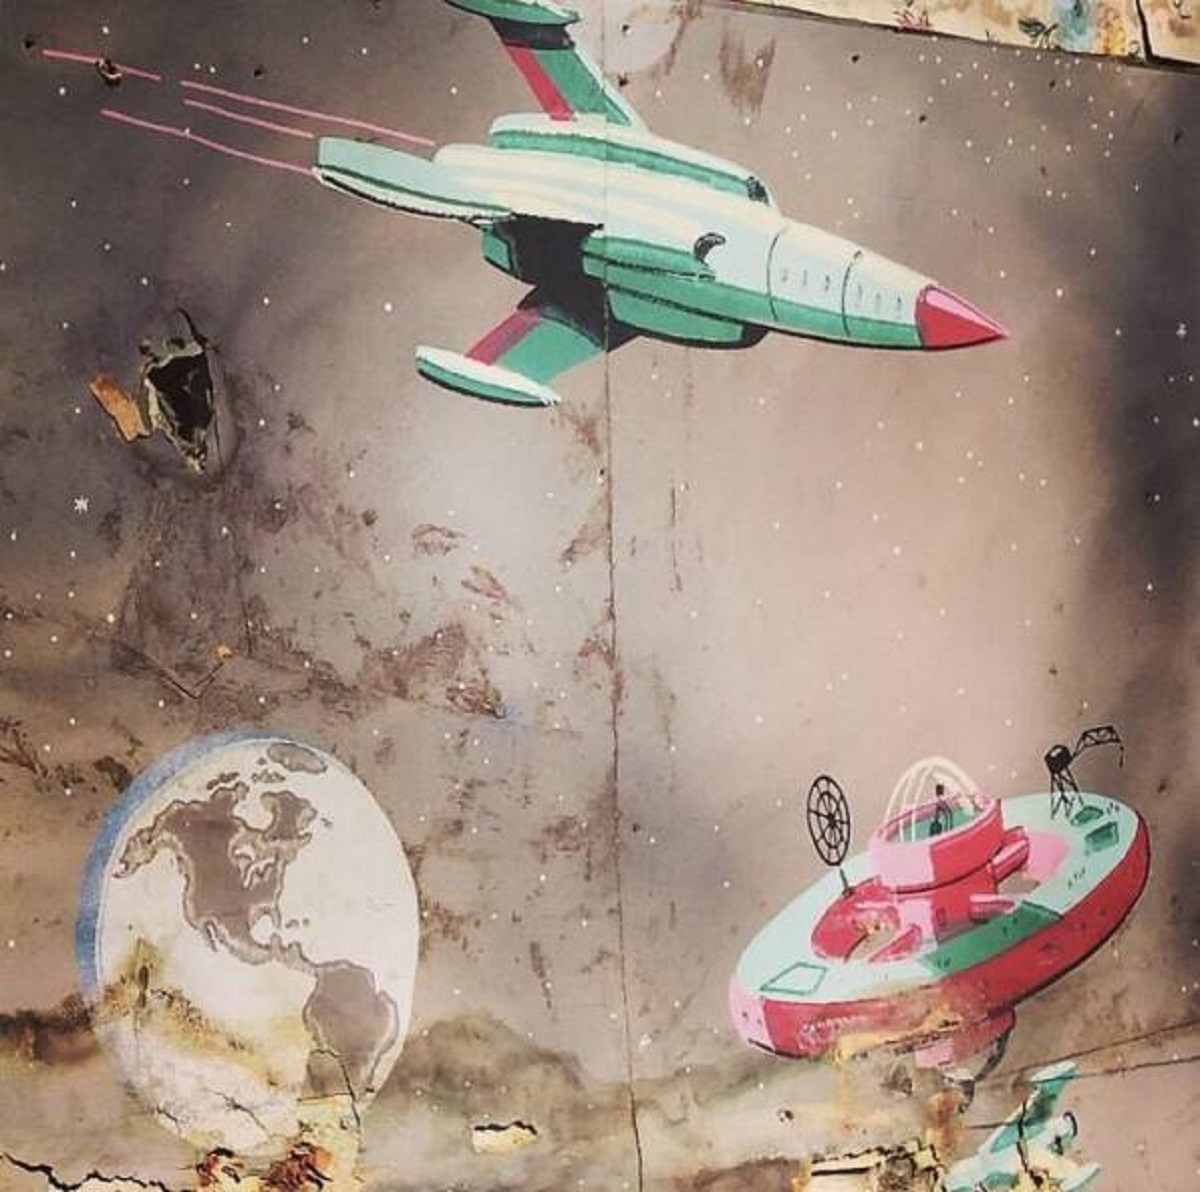 "This Vintage Space Themed Wallpaper Found Under 3 Layers Of Other Wallpaper In An Old Farm House"